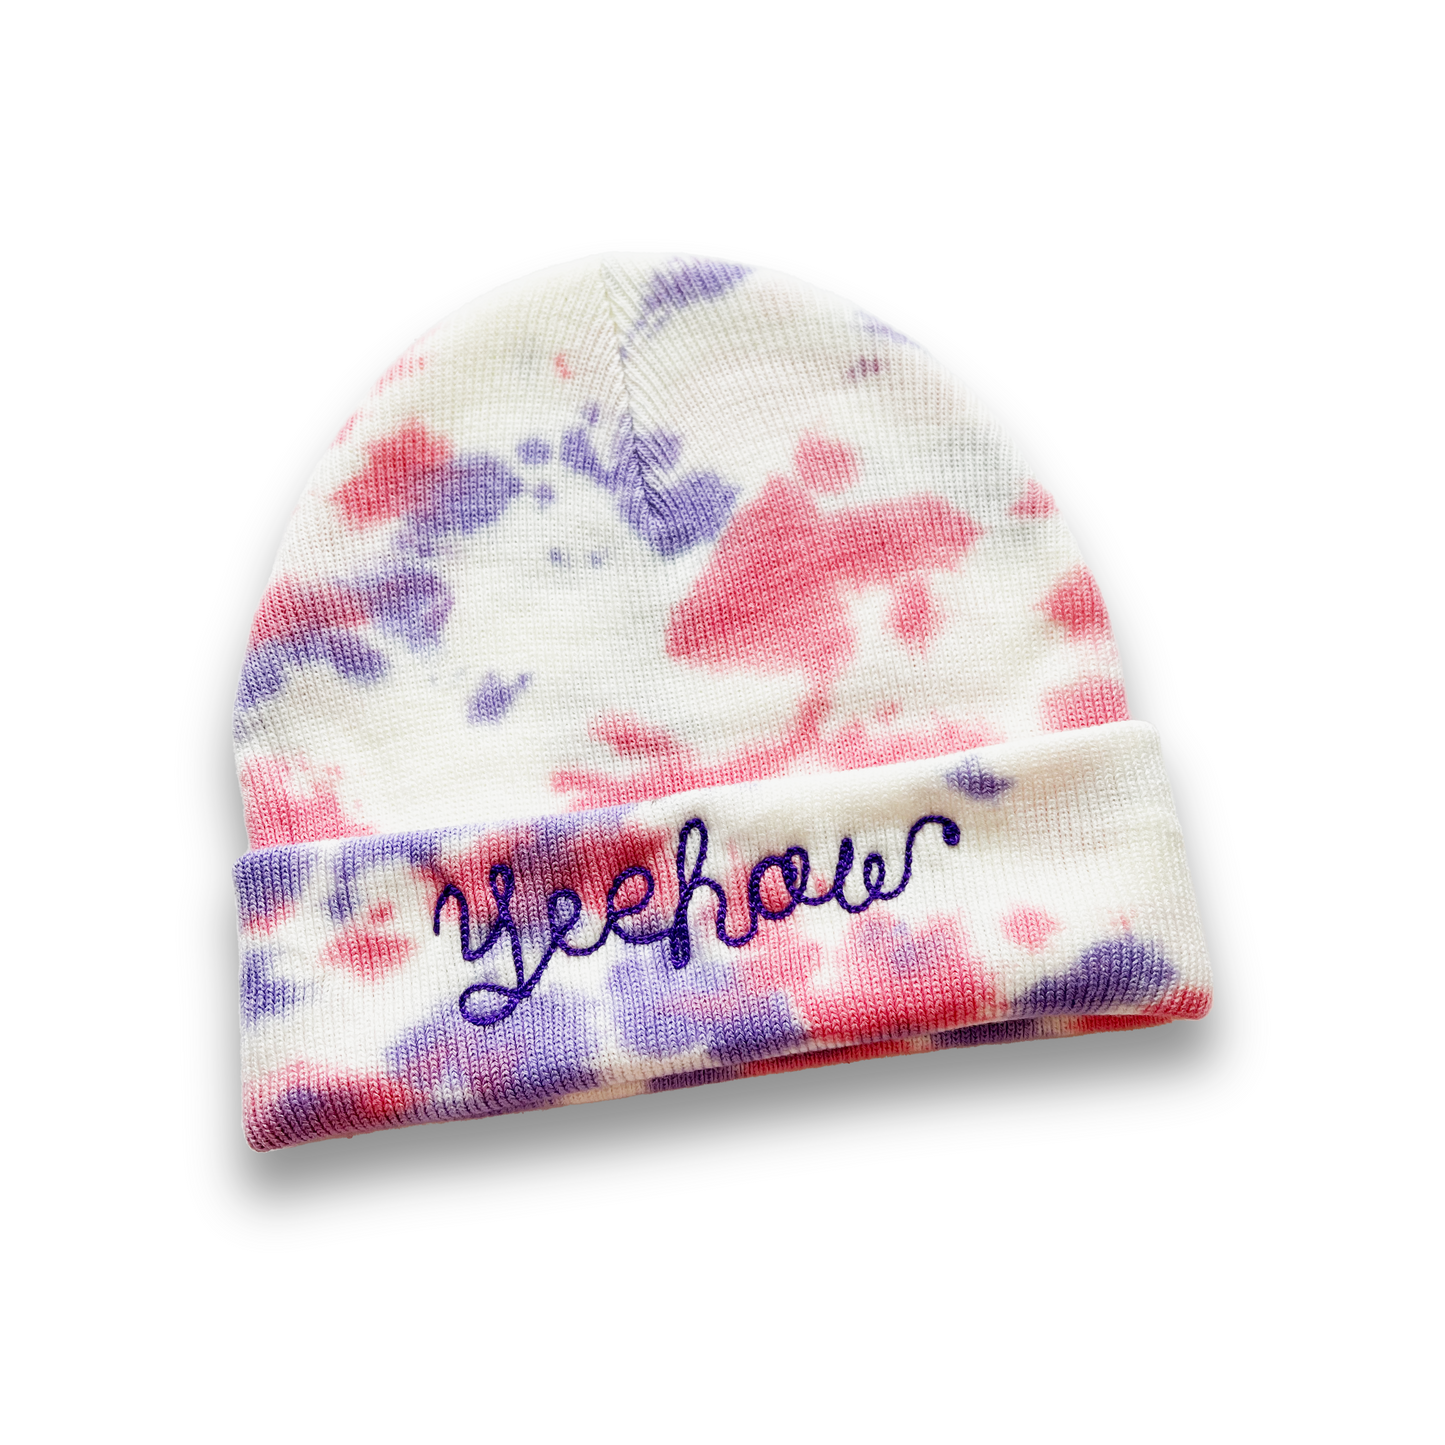 Customizable Chainstitch Embroidered Beanie